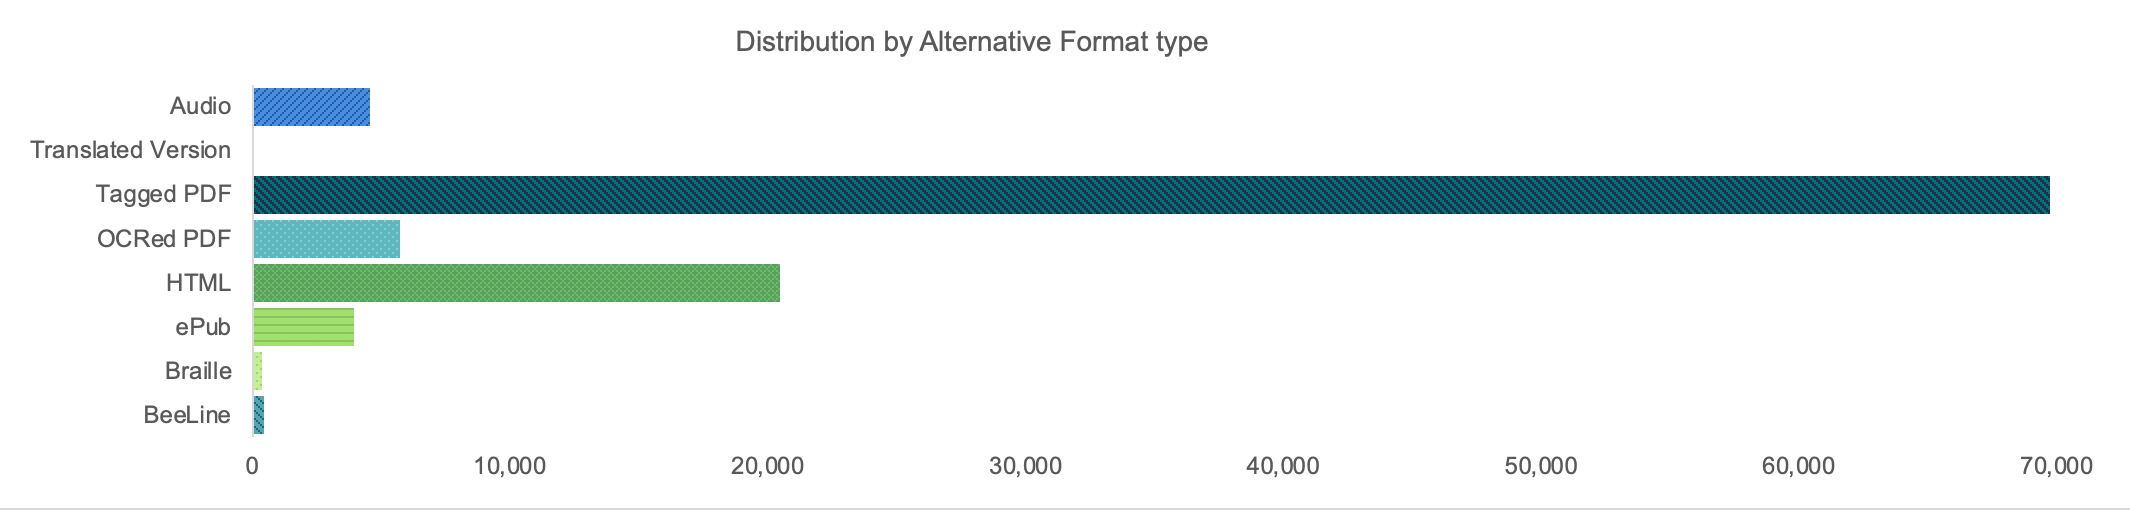 Distribution by type of alternative format